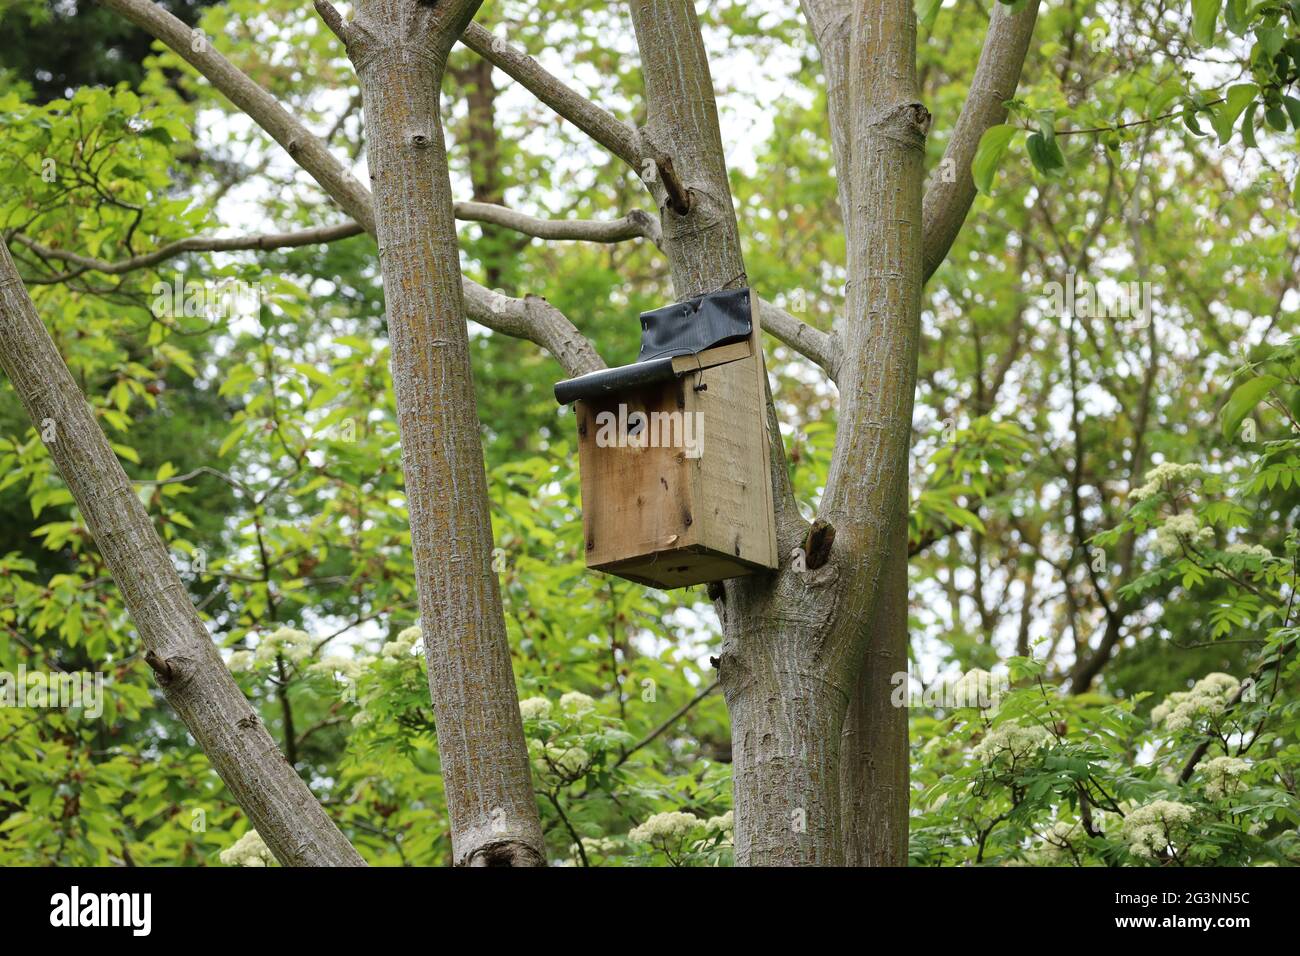 Nest box attached to snake bark acer tree in woods - Sharnbrook, Bedfordshire, England, UK Stock Photo